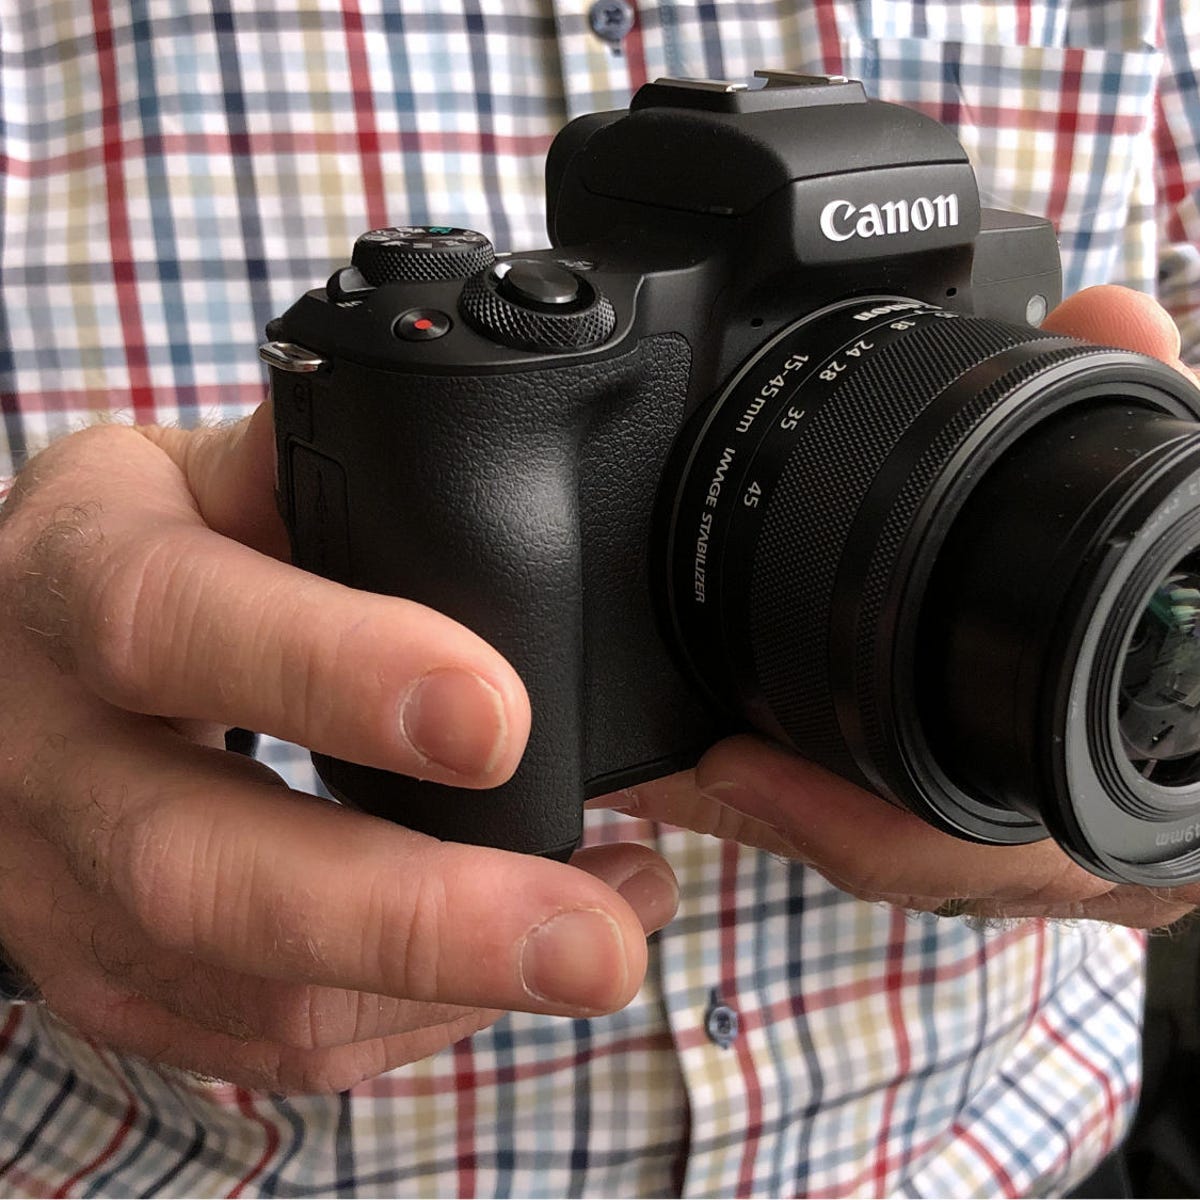 Canon EOS M50 review: Canon's M50 middle mirrorless plays catch-up with 4K,  improved AF - CNET